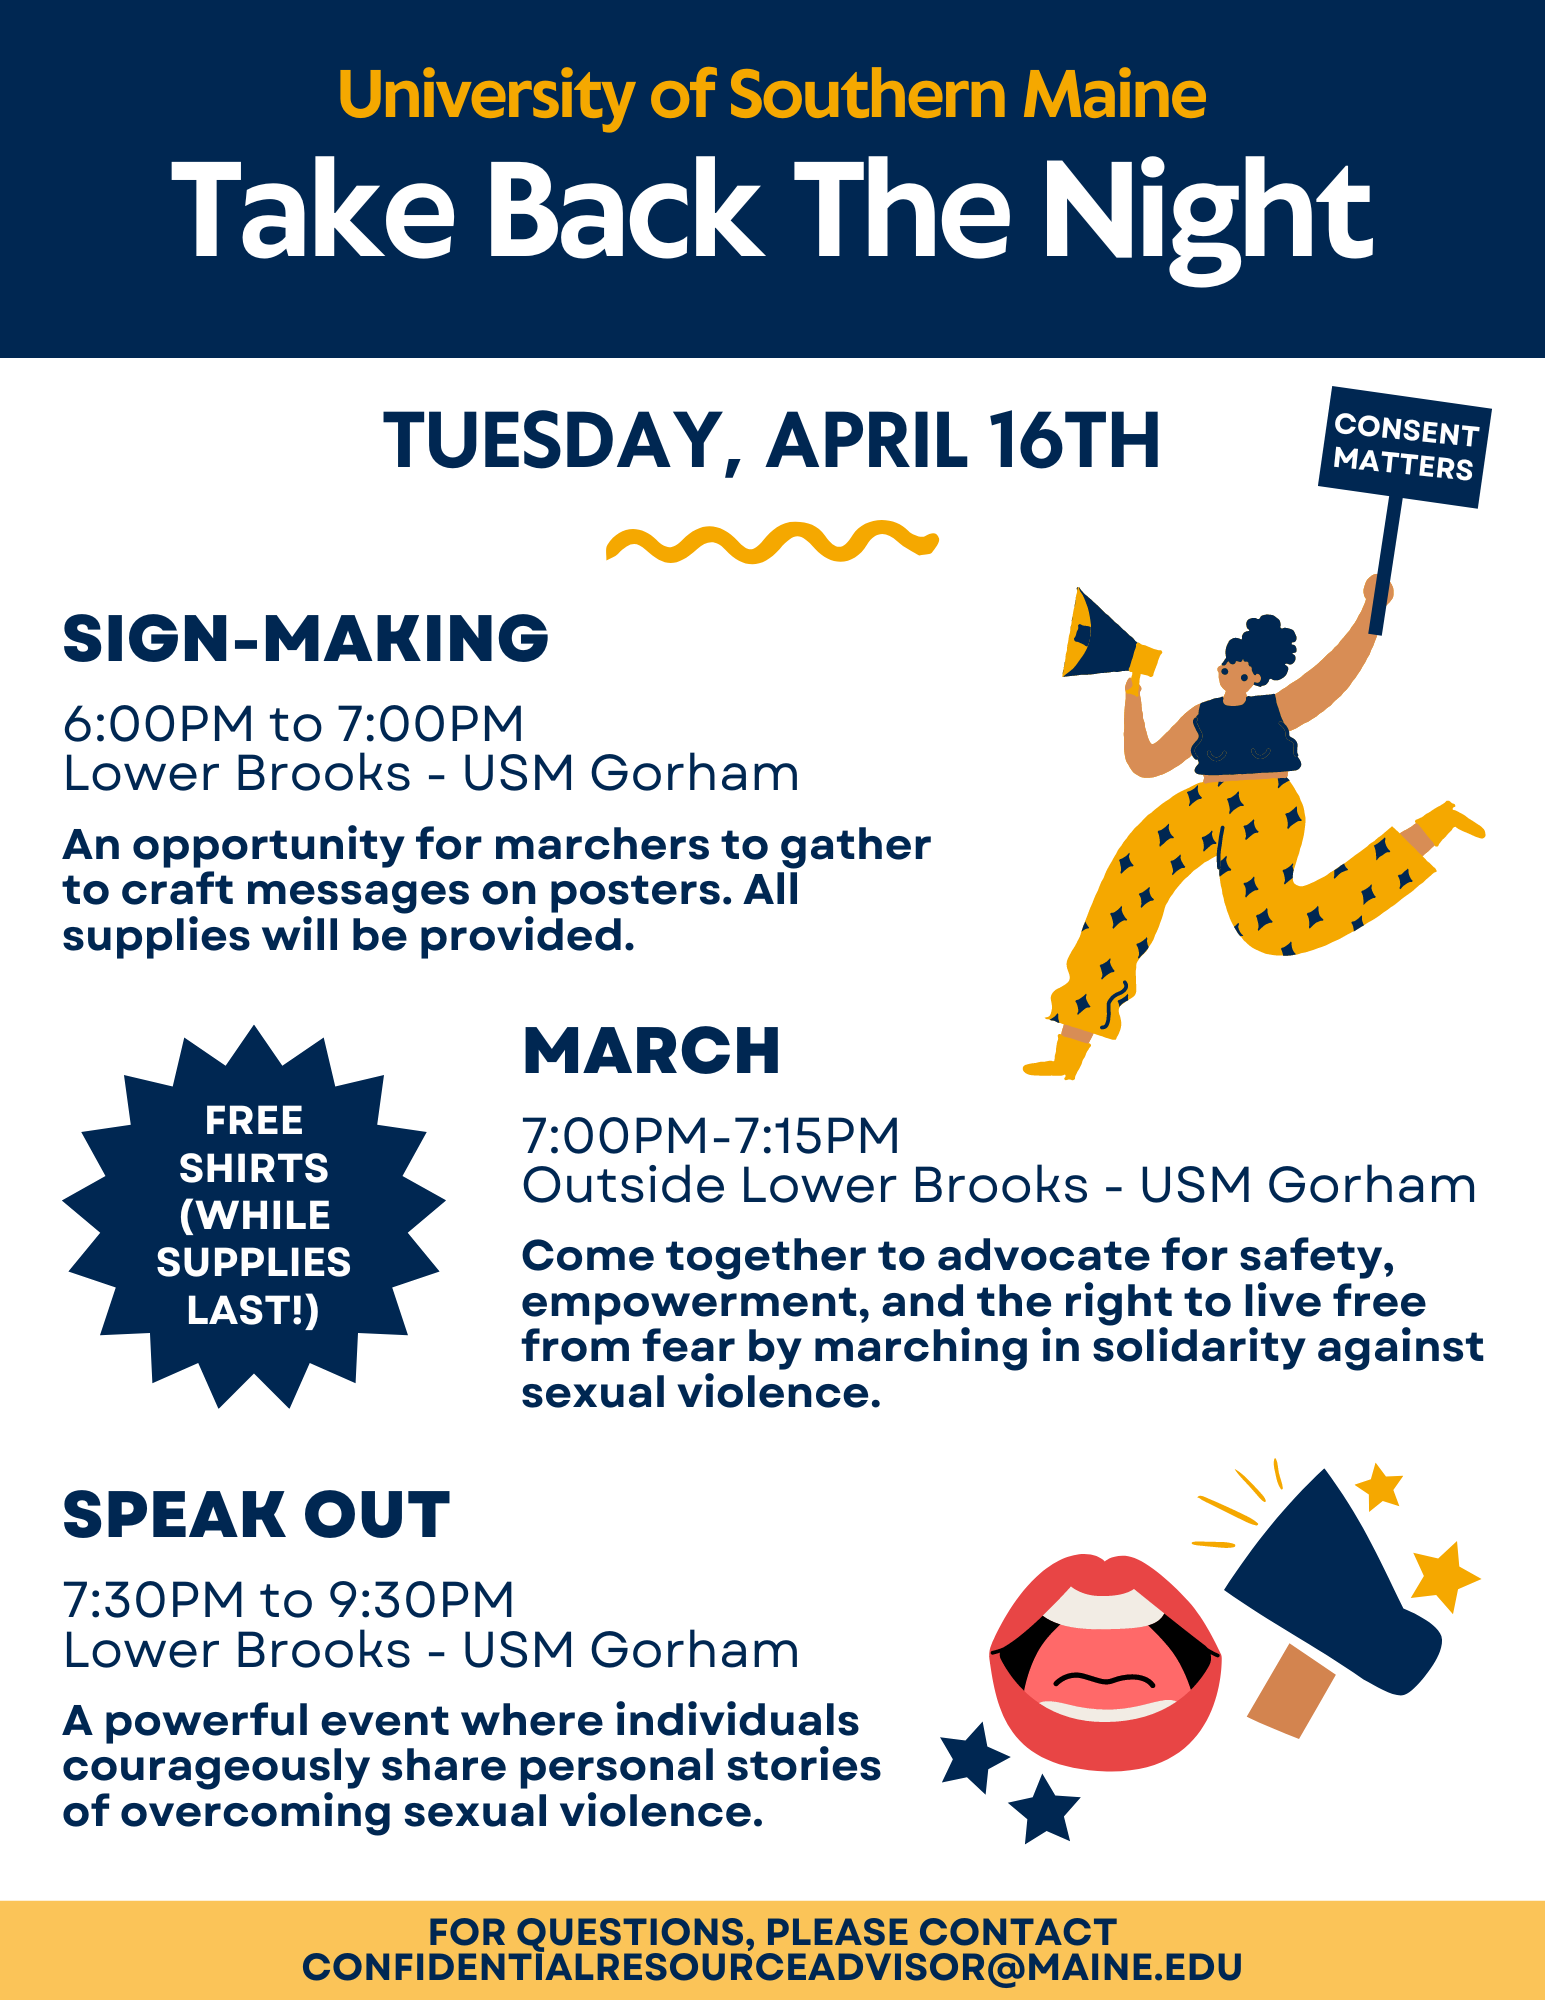 Take Back The Night flyer with event details